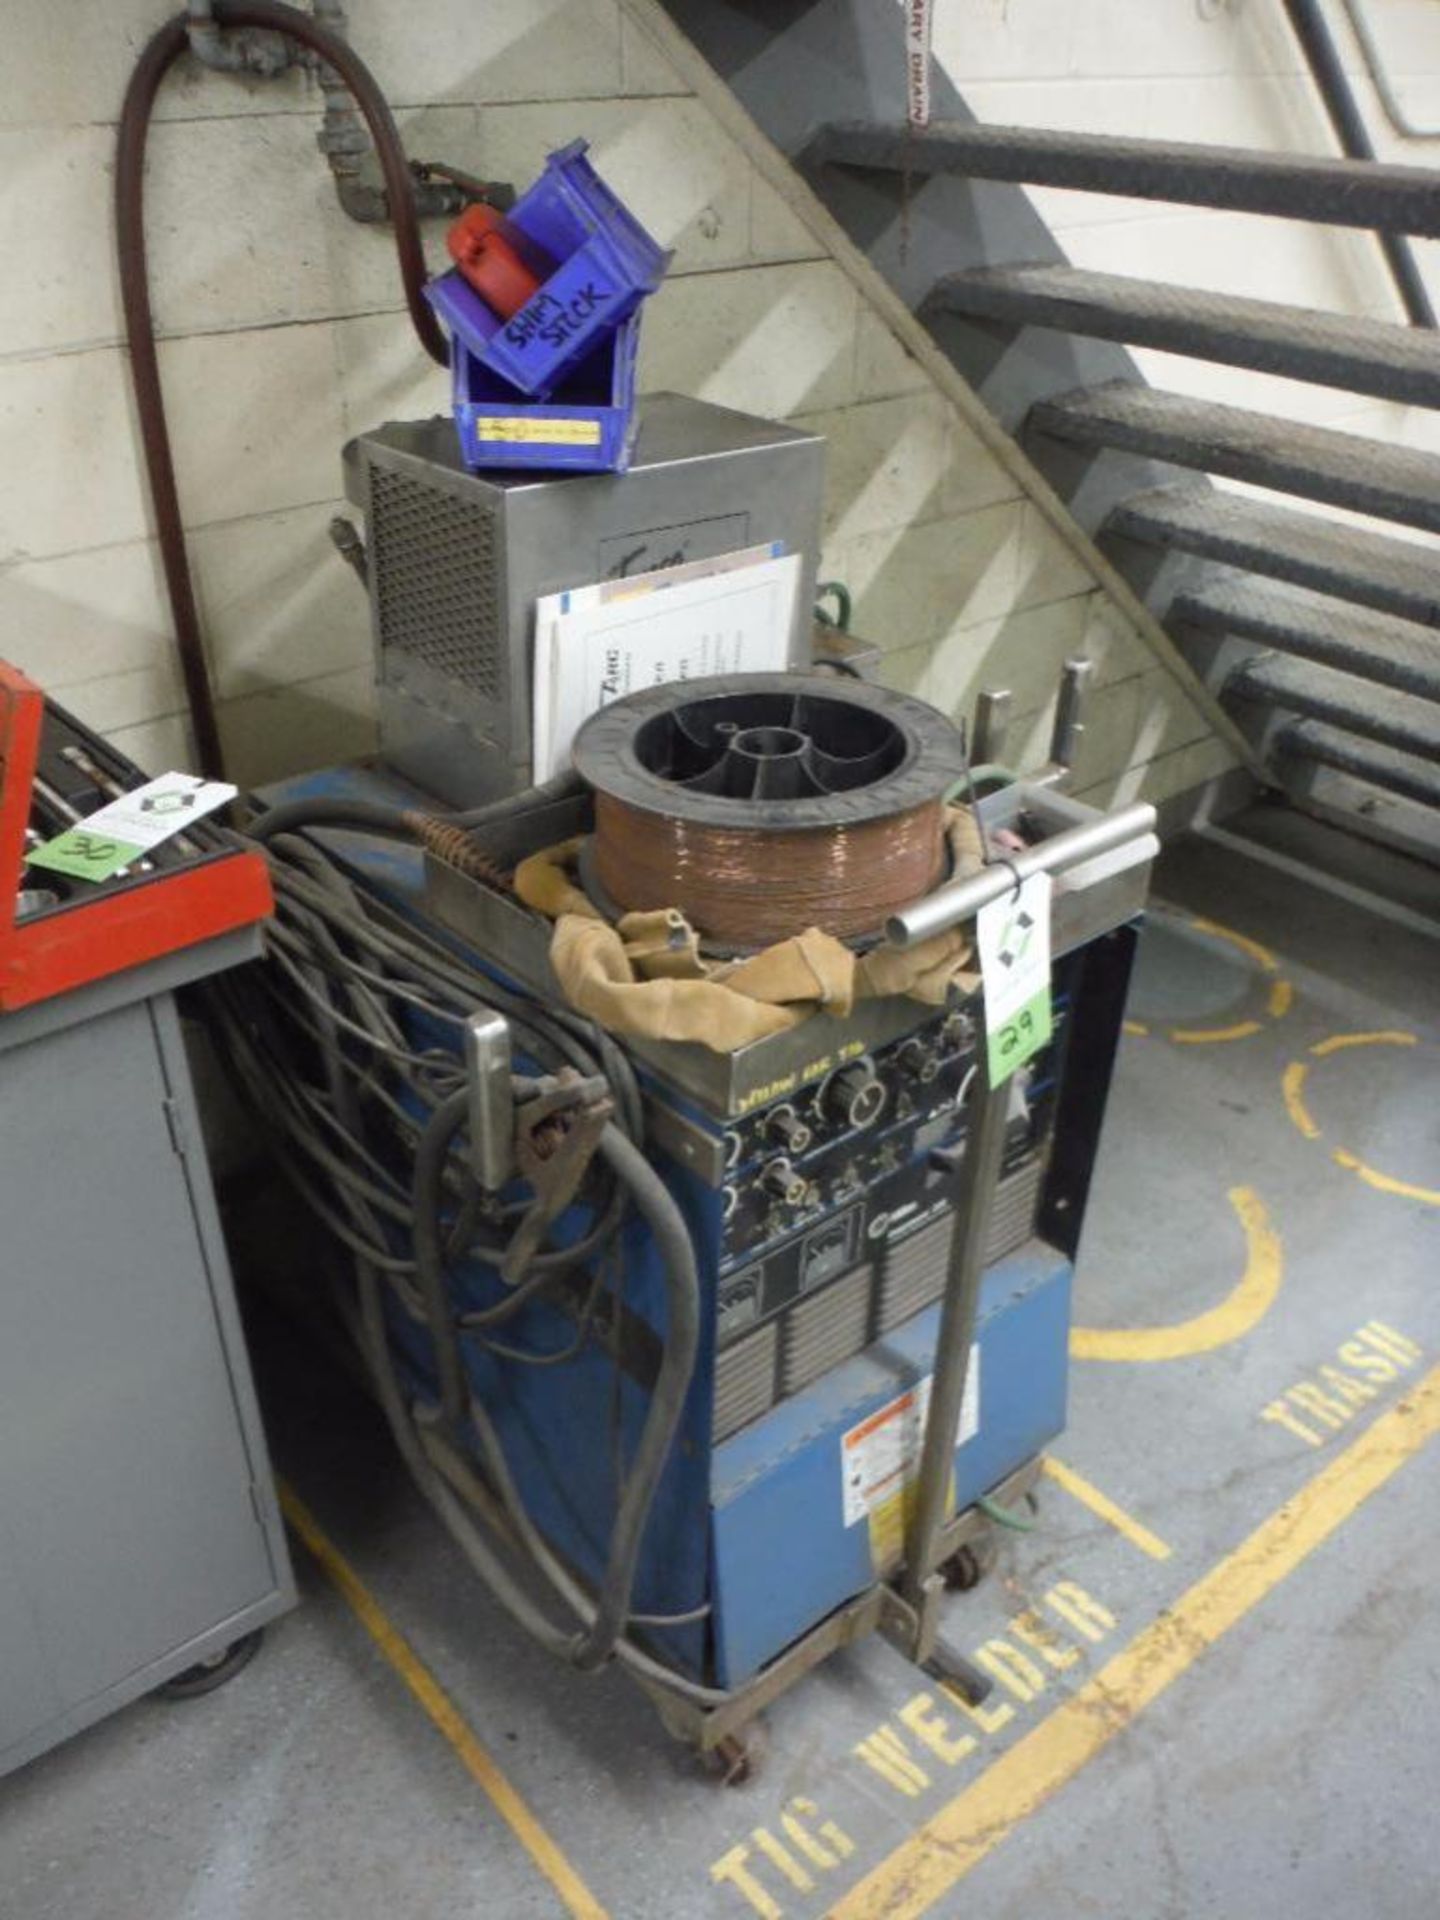 Miller synchro wave 250 AC/DC welder, foot control ** Rigging Fee: $25 ** - Image 2 of 11